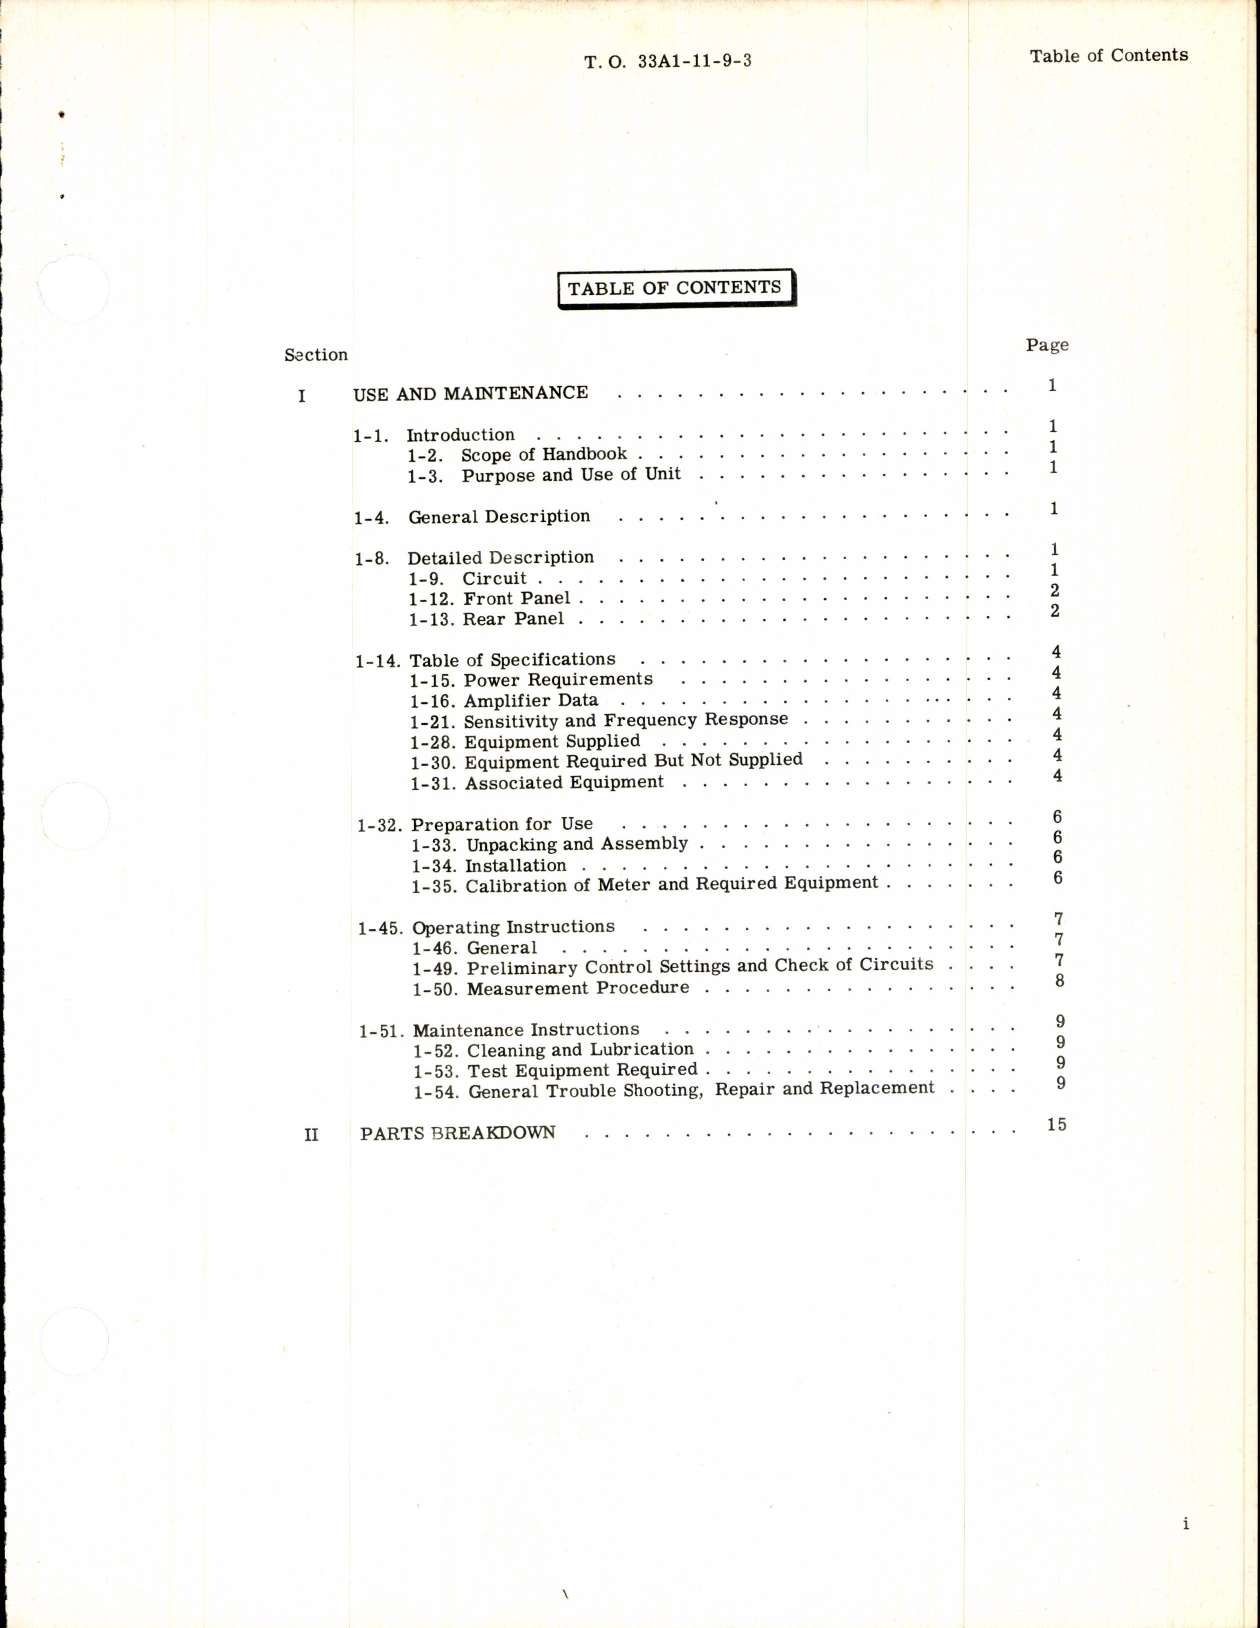 Sample page 3 from AirCorps Library document: Instructions & Parts Breakdown for Vibration Meter Type 1-117